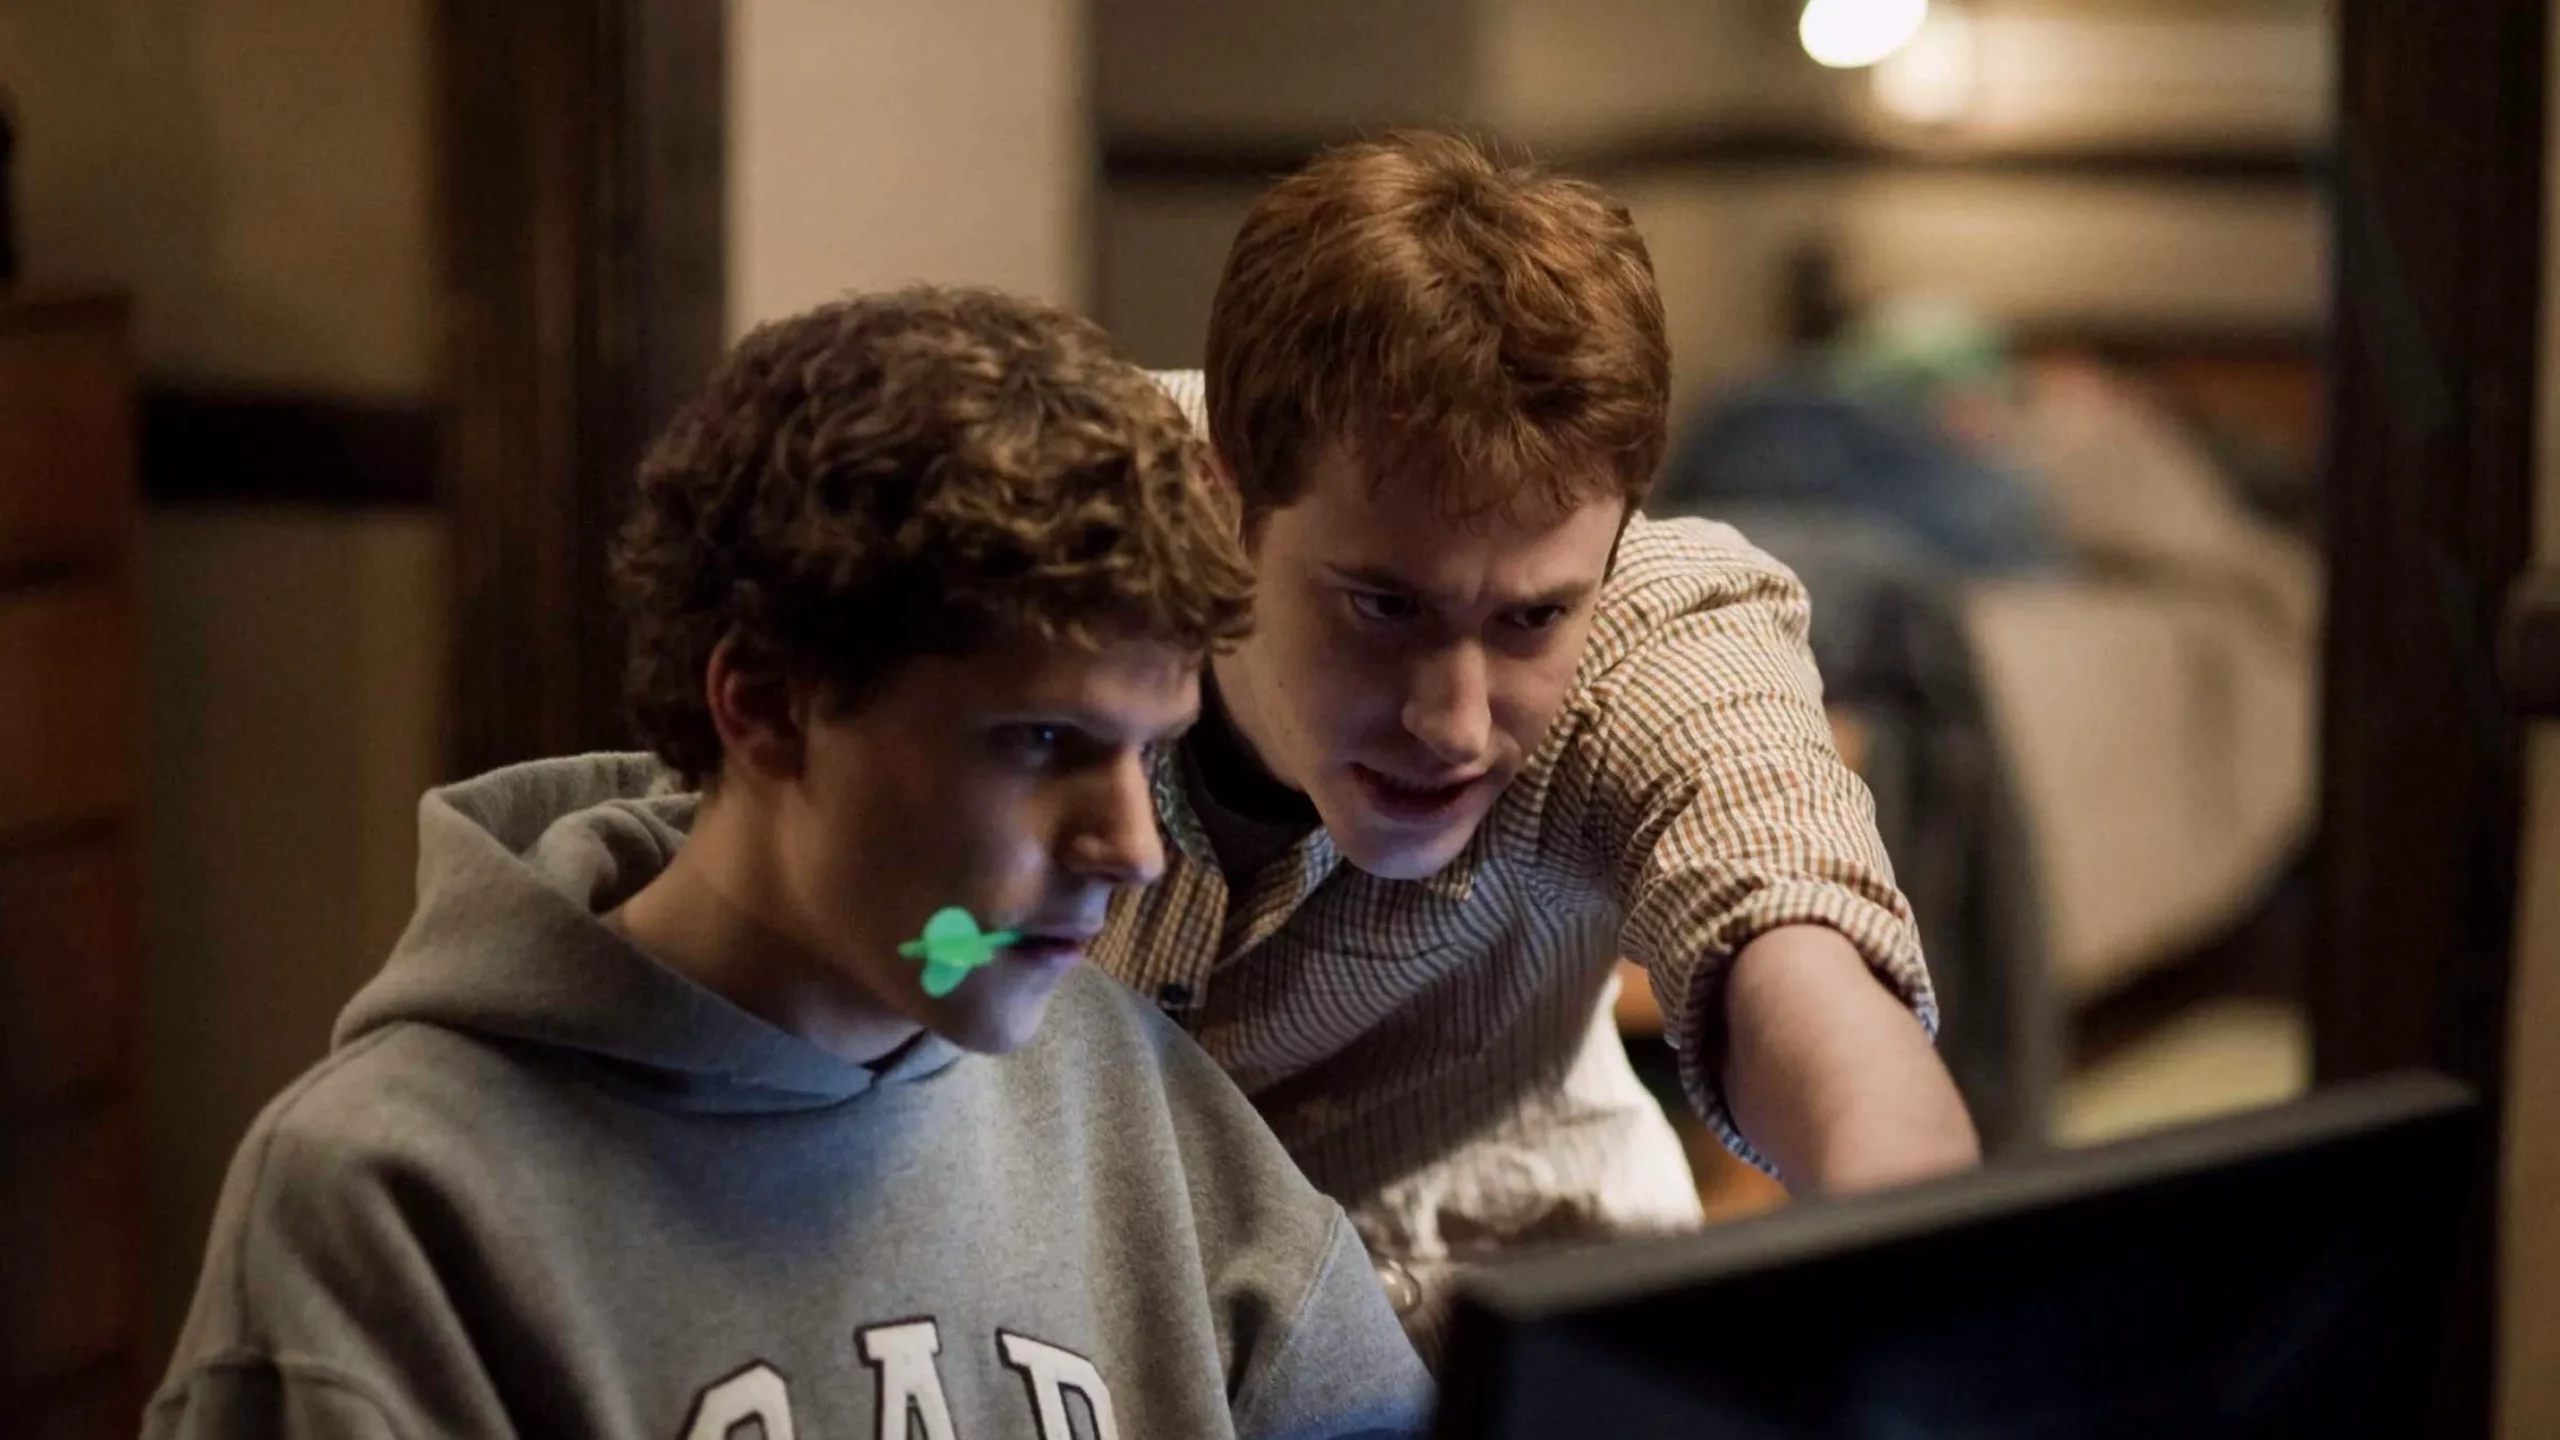 Mark Zuckerberge in a scene from the social network movie